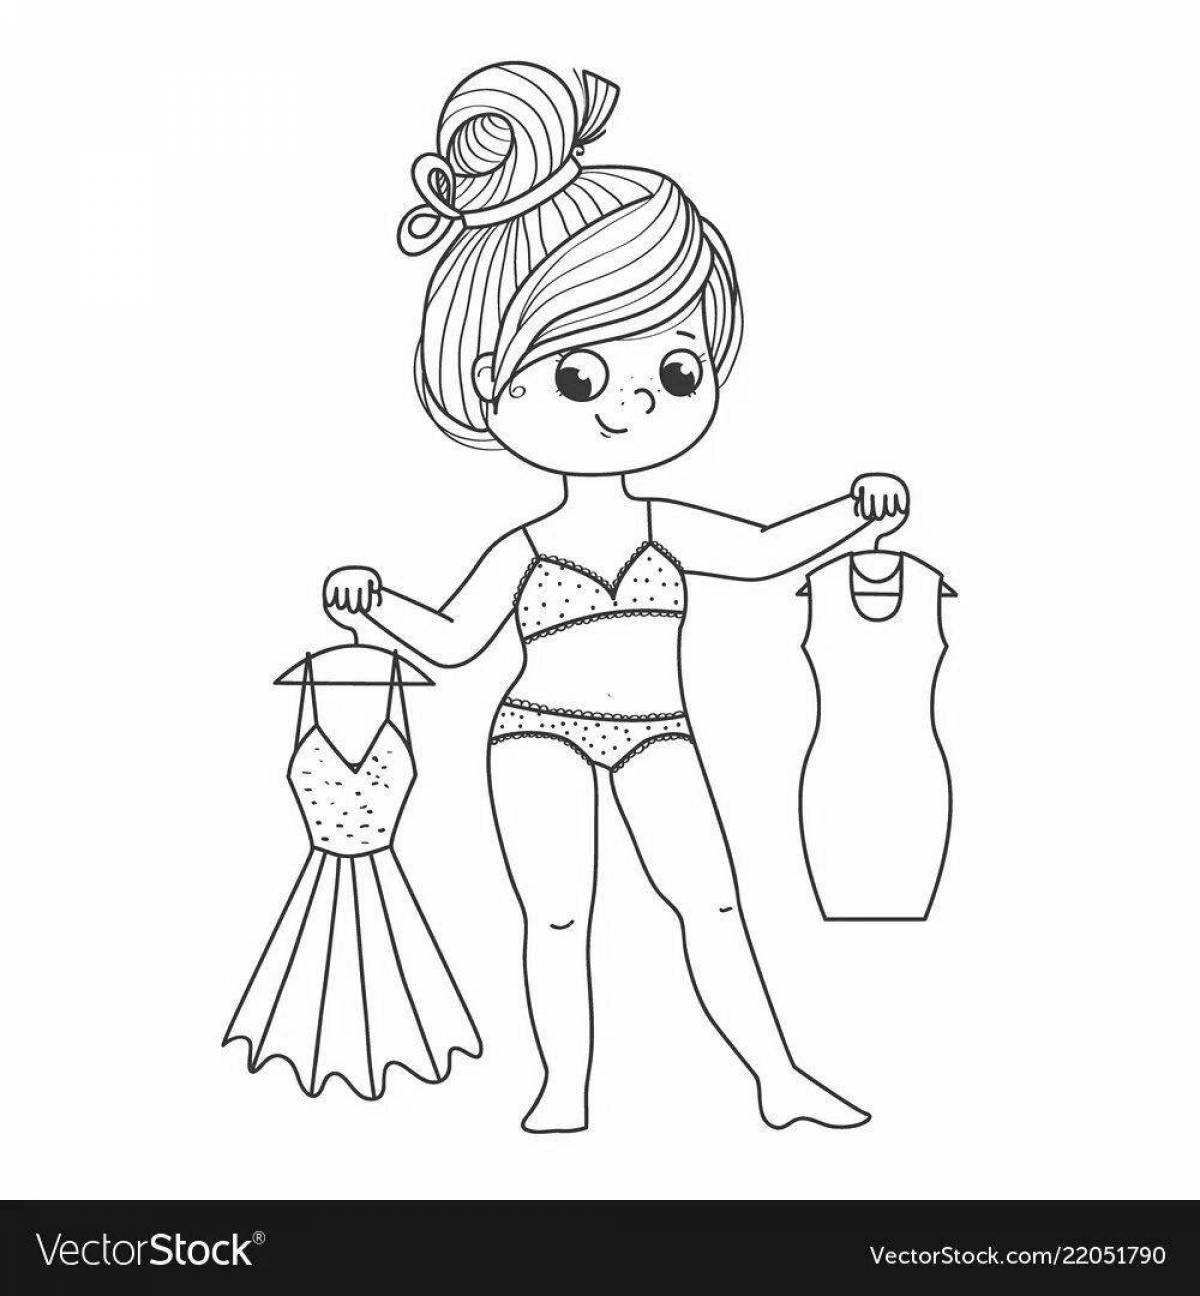 Coloring page joyful doll in a bathing suit